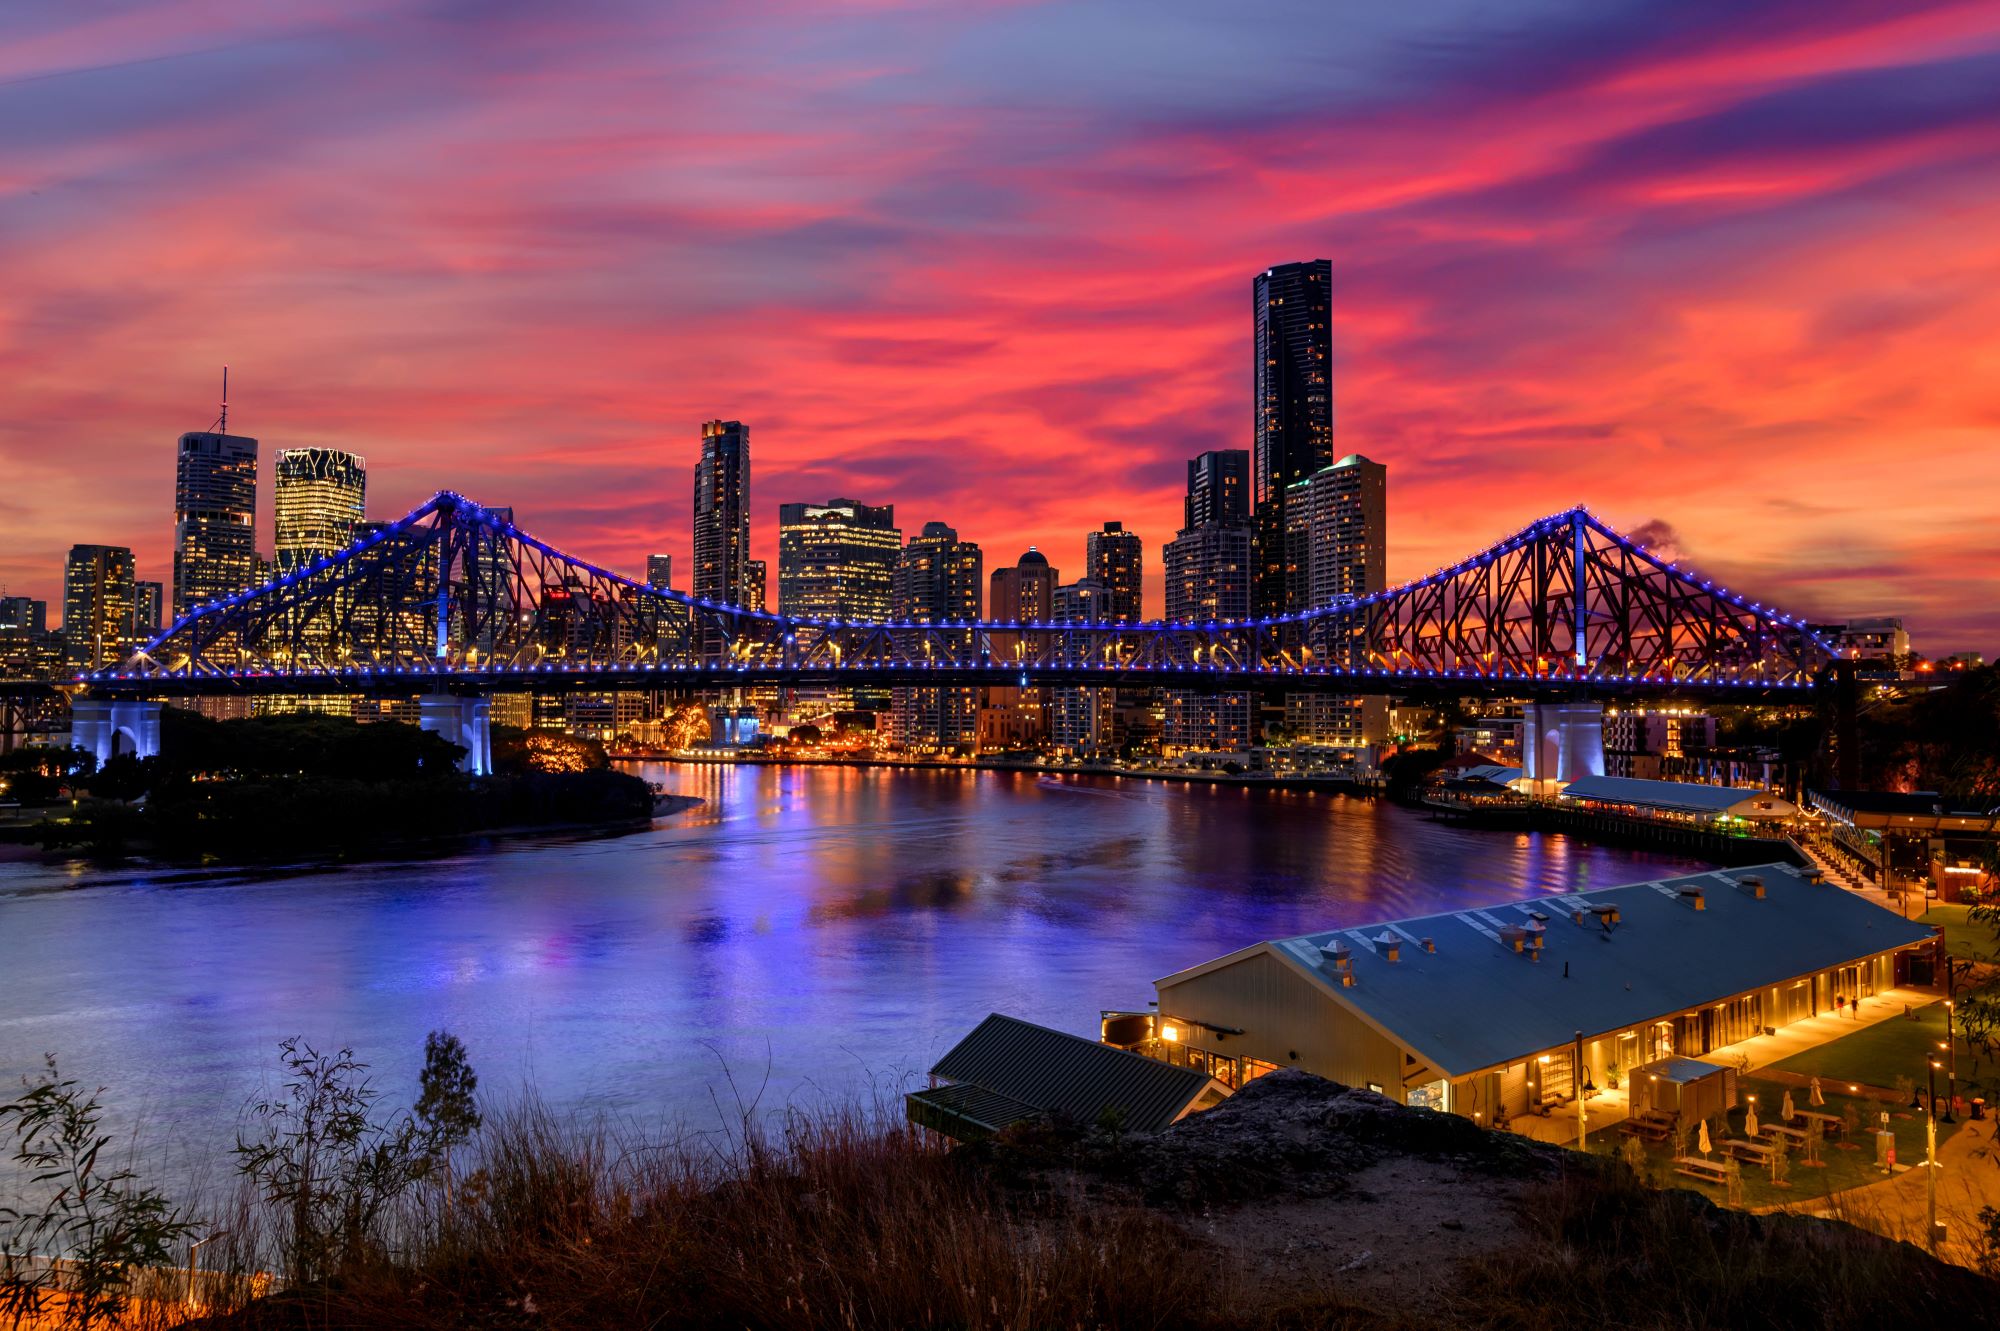 Sunset over Brisbane city with buildings and the Storage Bridge